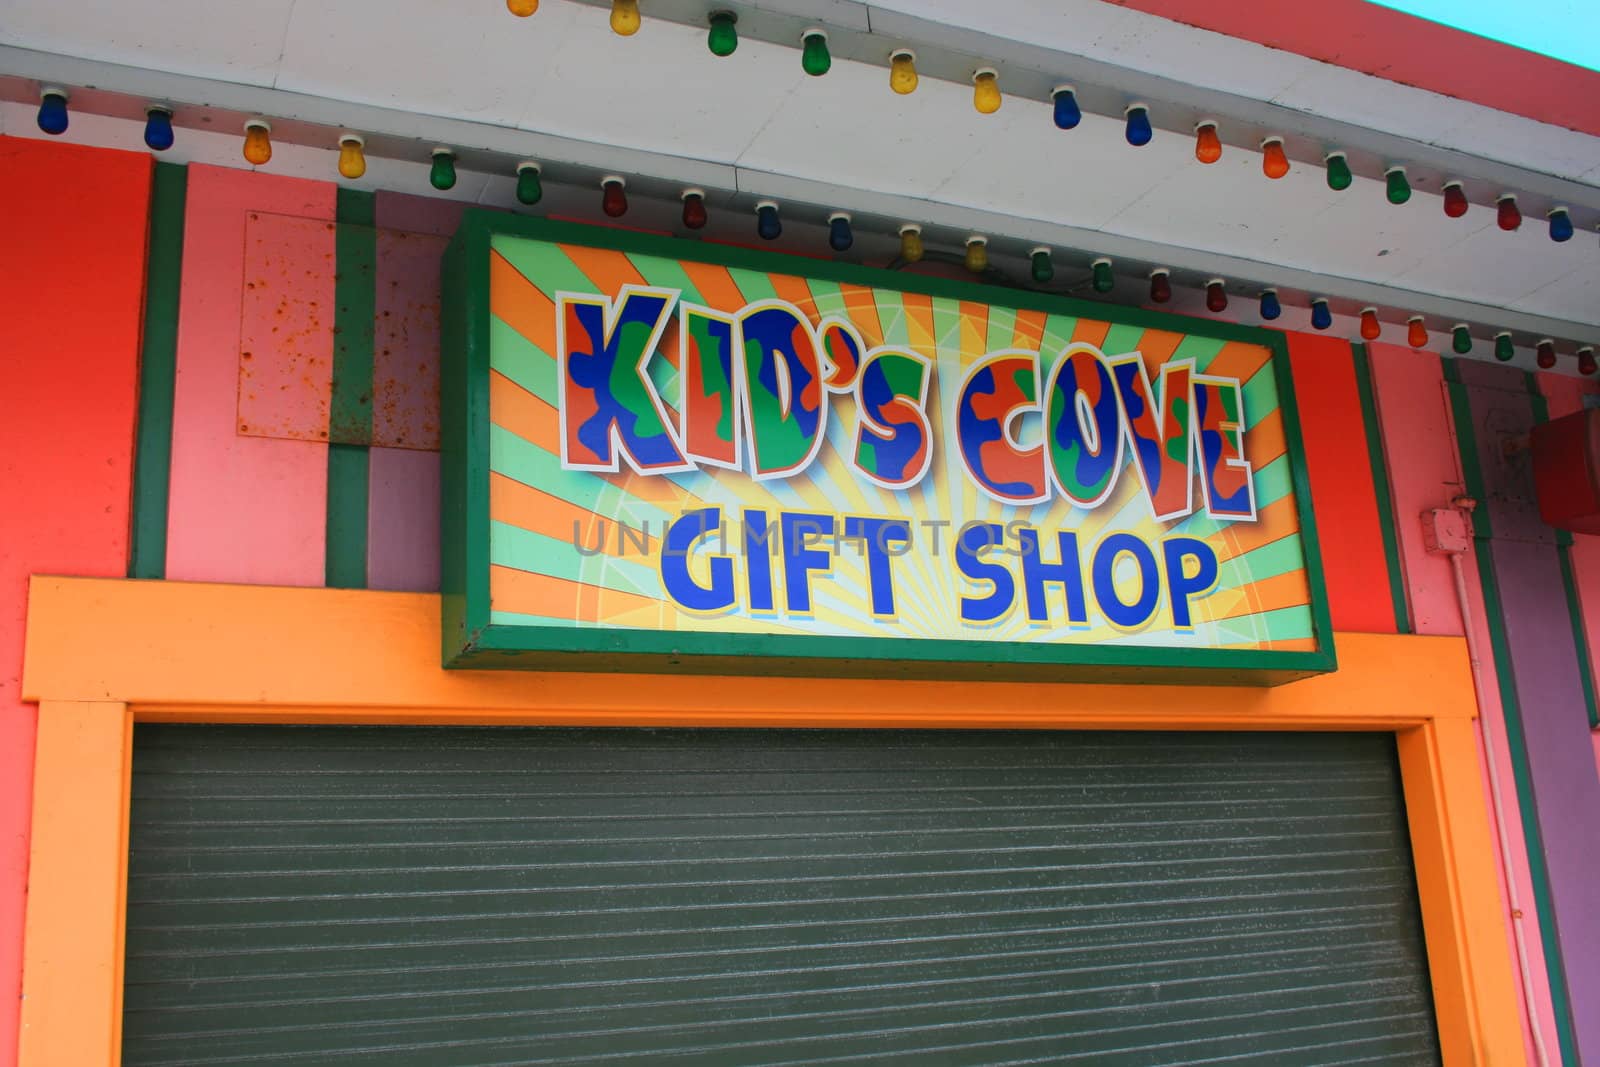 Close up of a gift shop sign.
